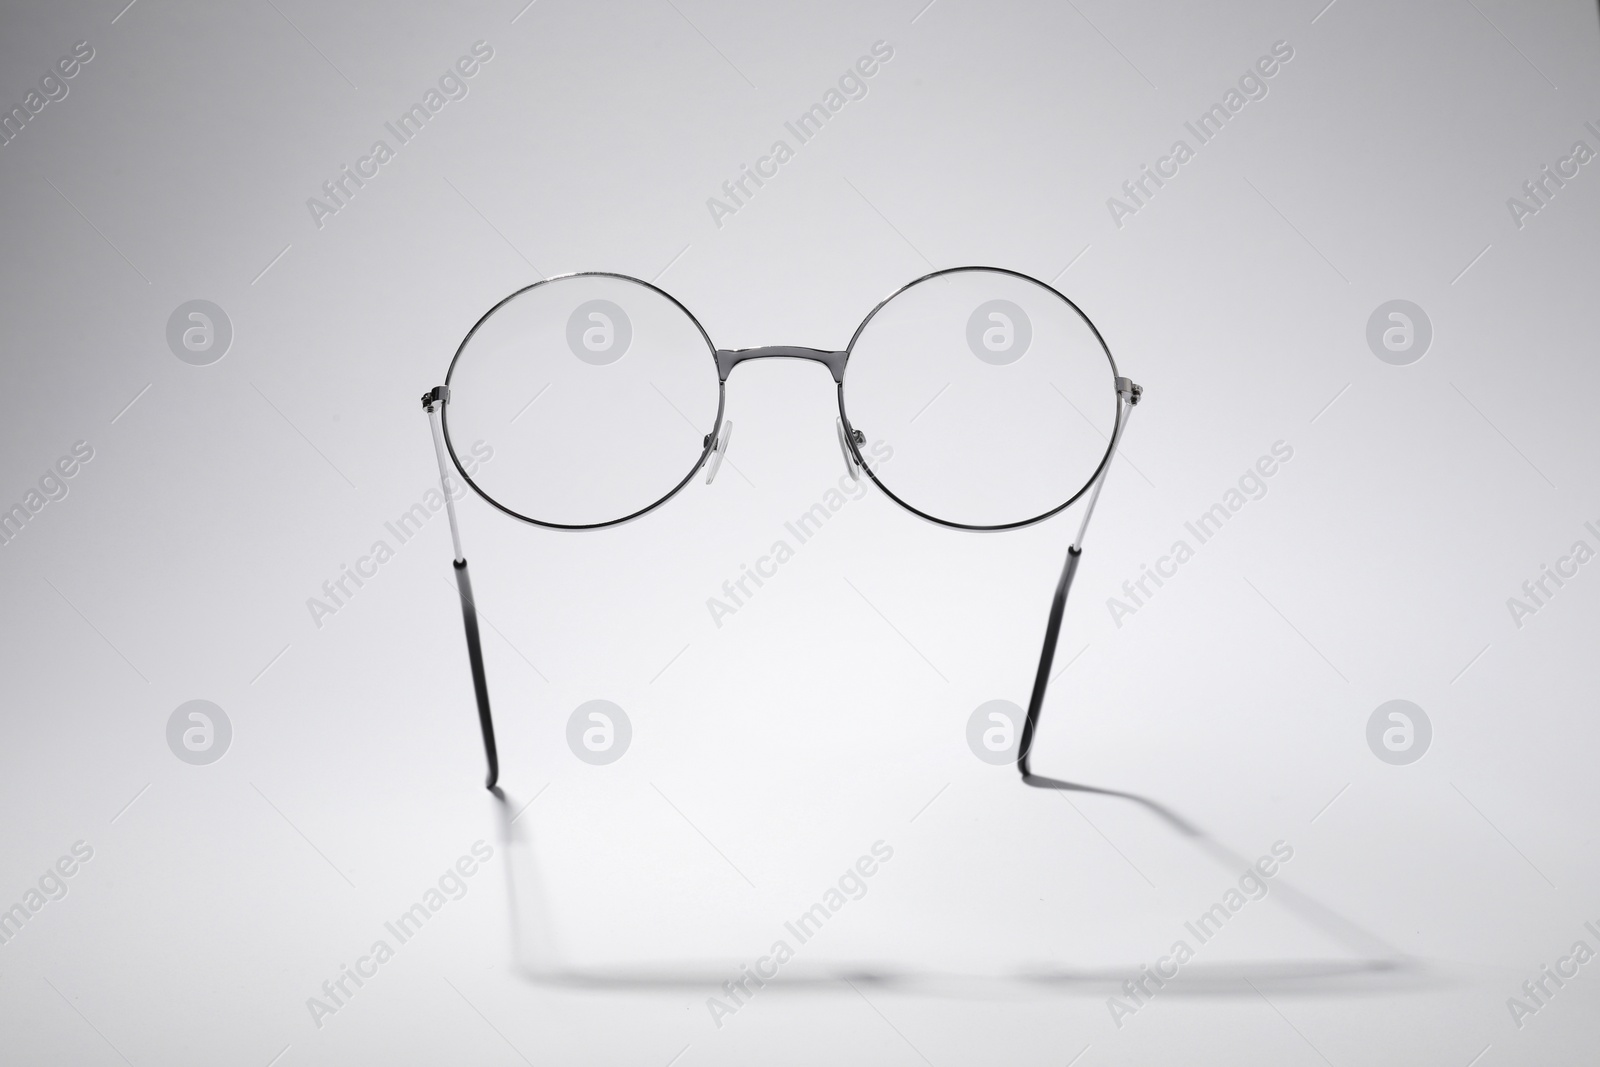 Photo of Stylish pair of glasses with metal frame on light grey background